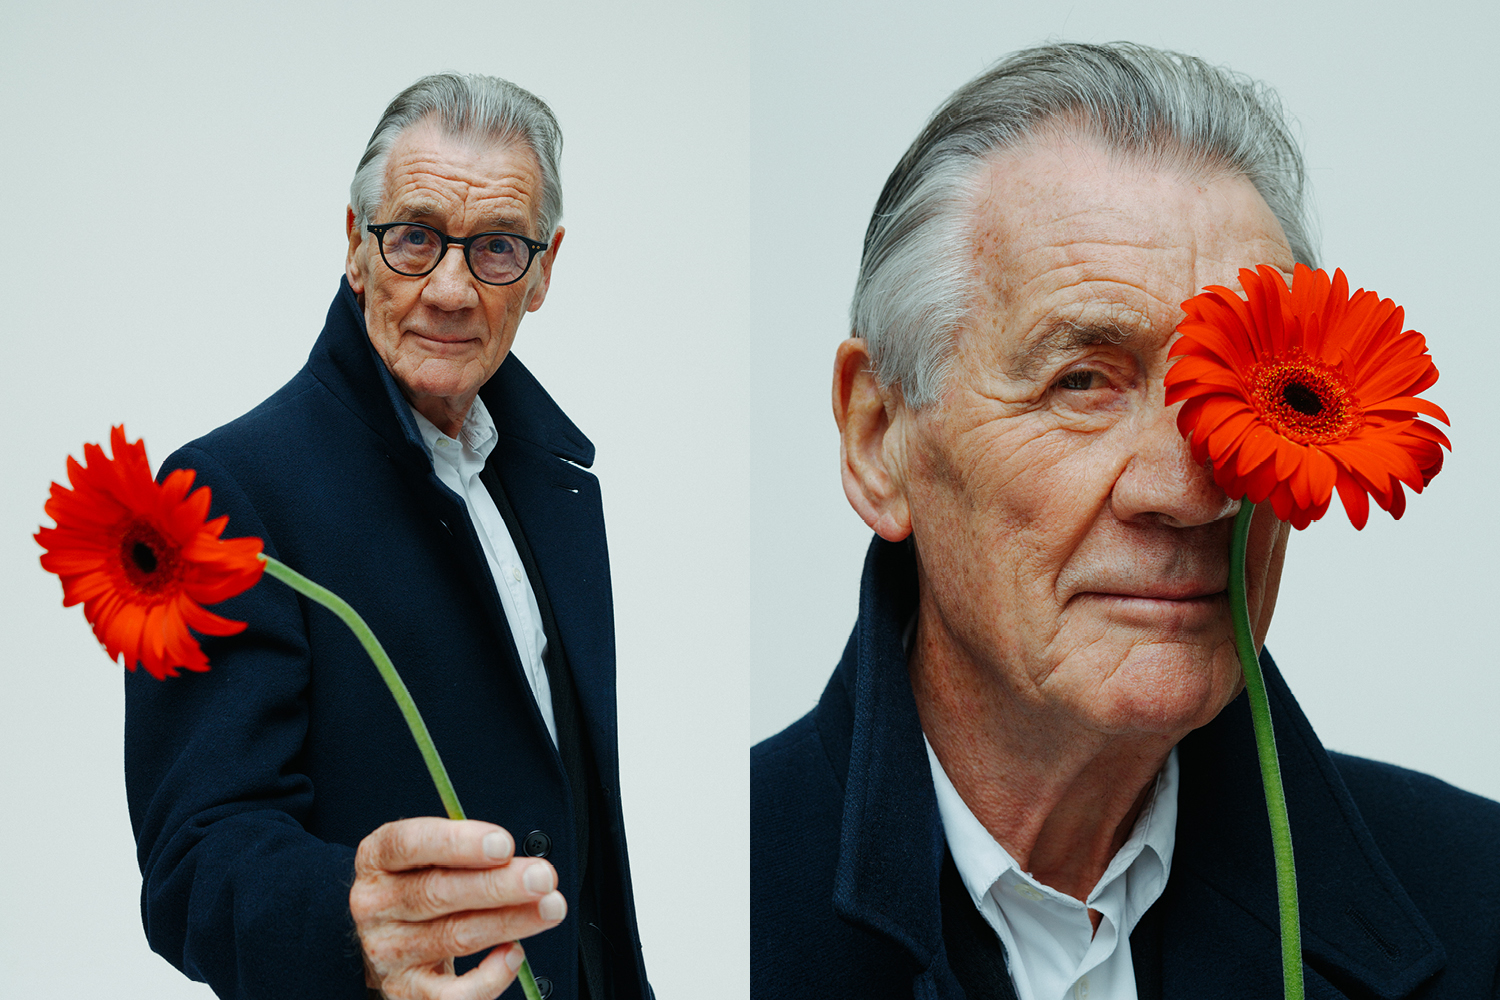 Famous comedian, member of Monty Python: Who is Michael Palin?